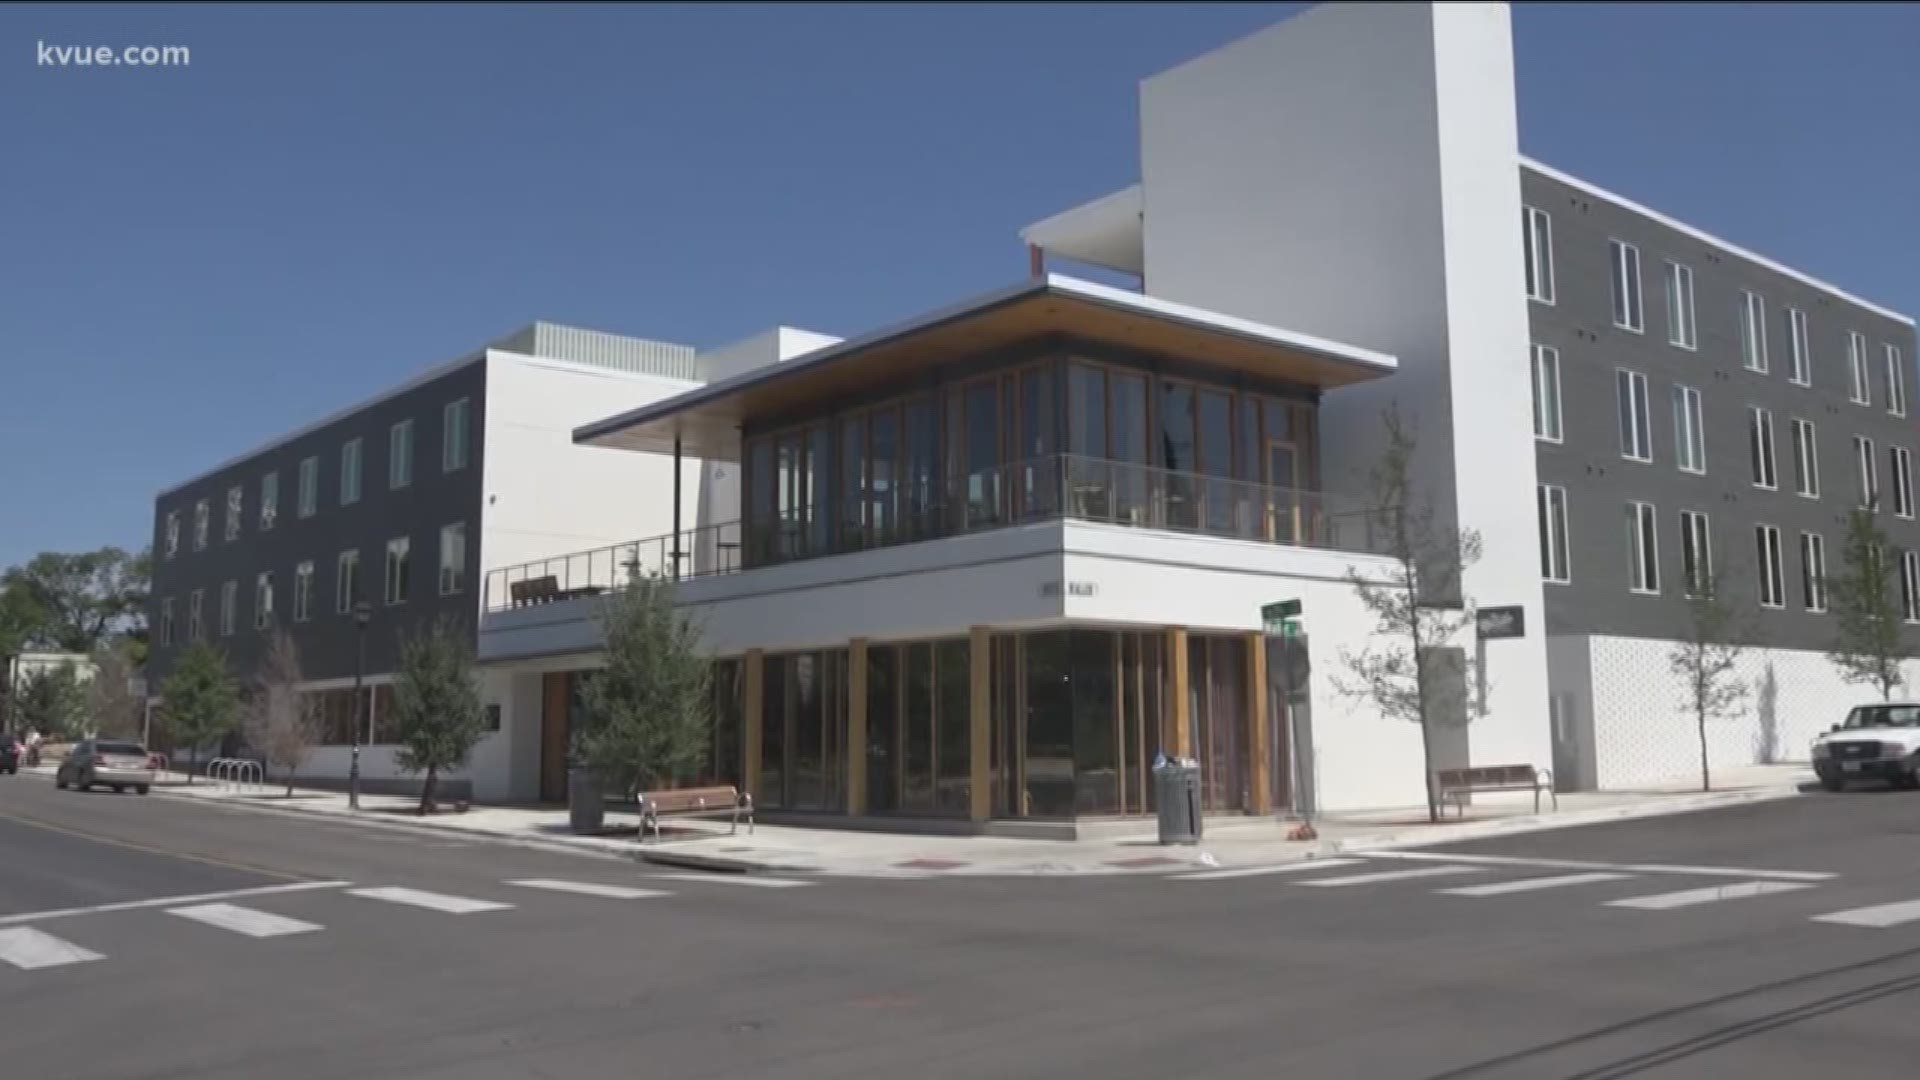 A brand-new boutique hotel on Sixth Street is aiming to fit in with its neighbors.